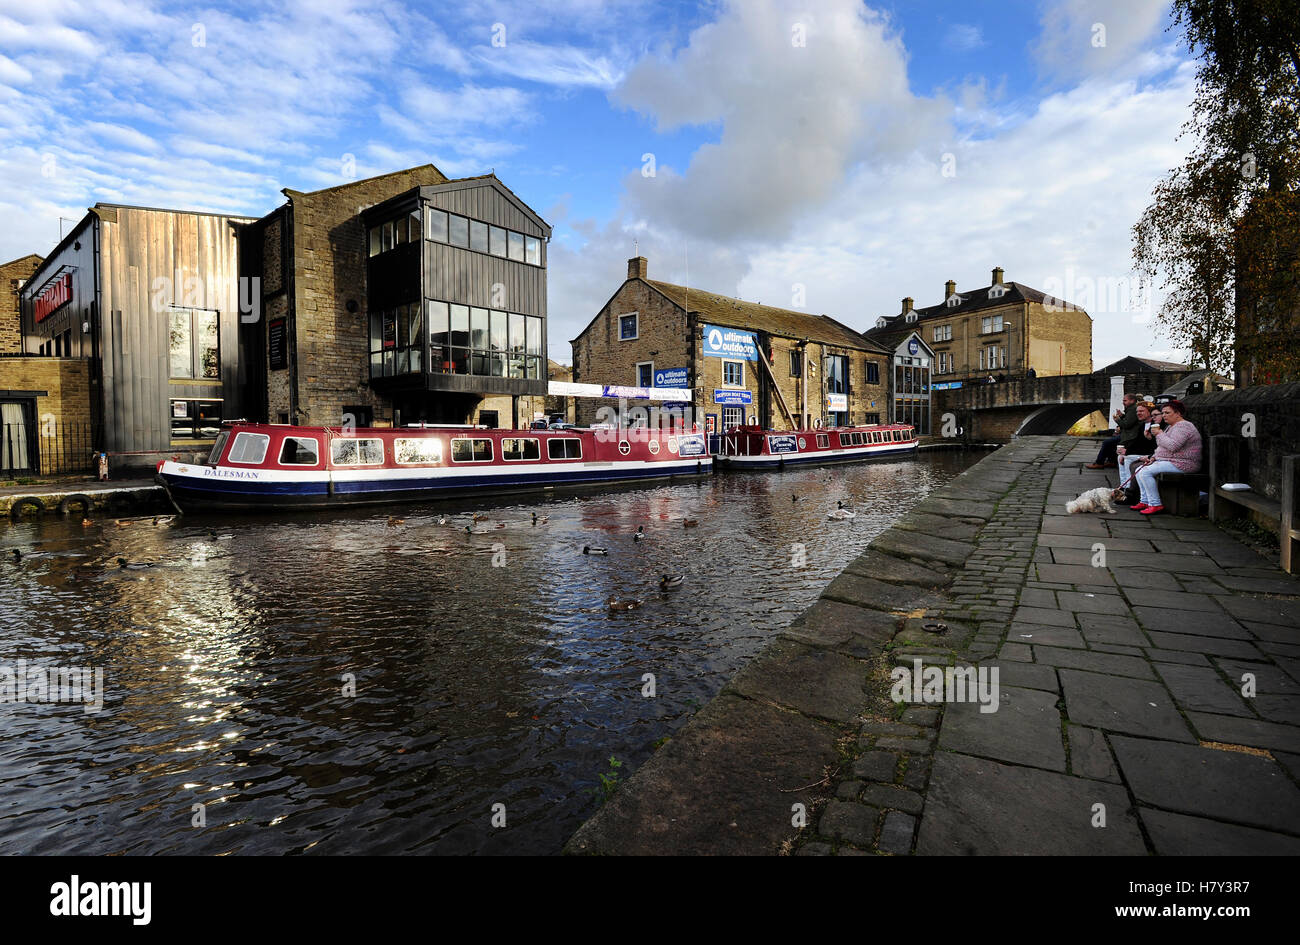 Leeds-Liverpool Canal, Skipton, District of Craven, North Yorkshire. England UK. Picture by Paul Heyes, Monday October 24, 2016. Stock Photo